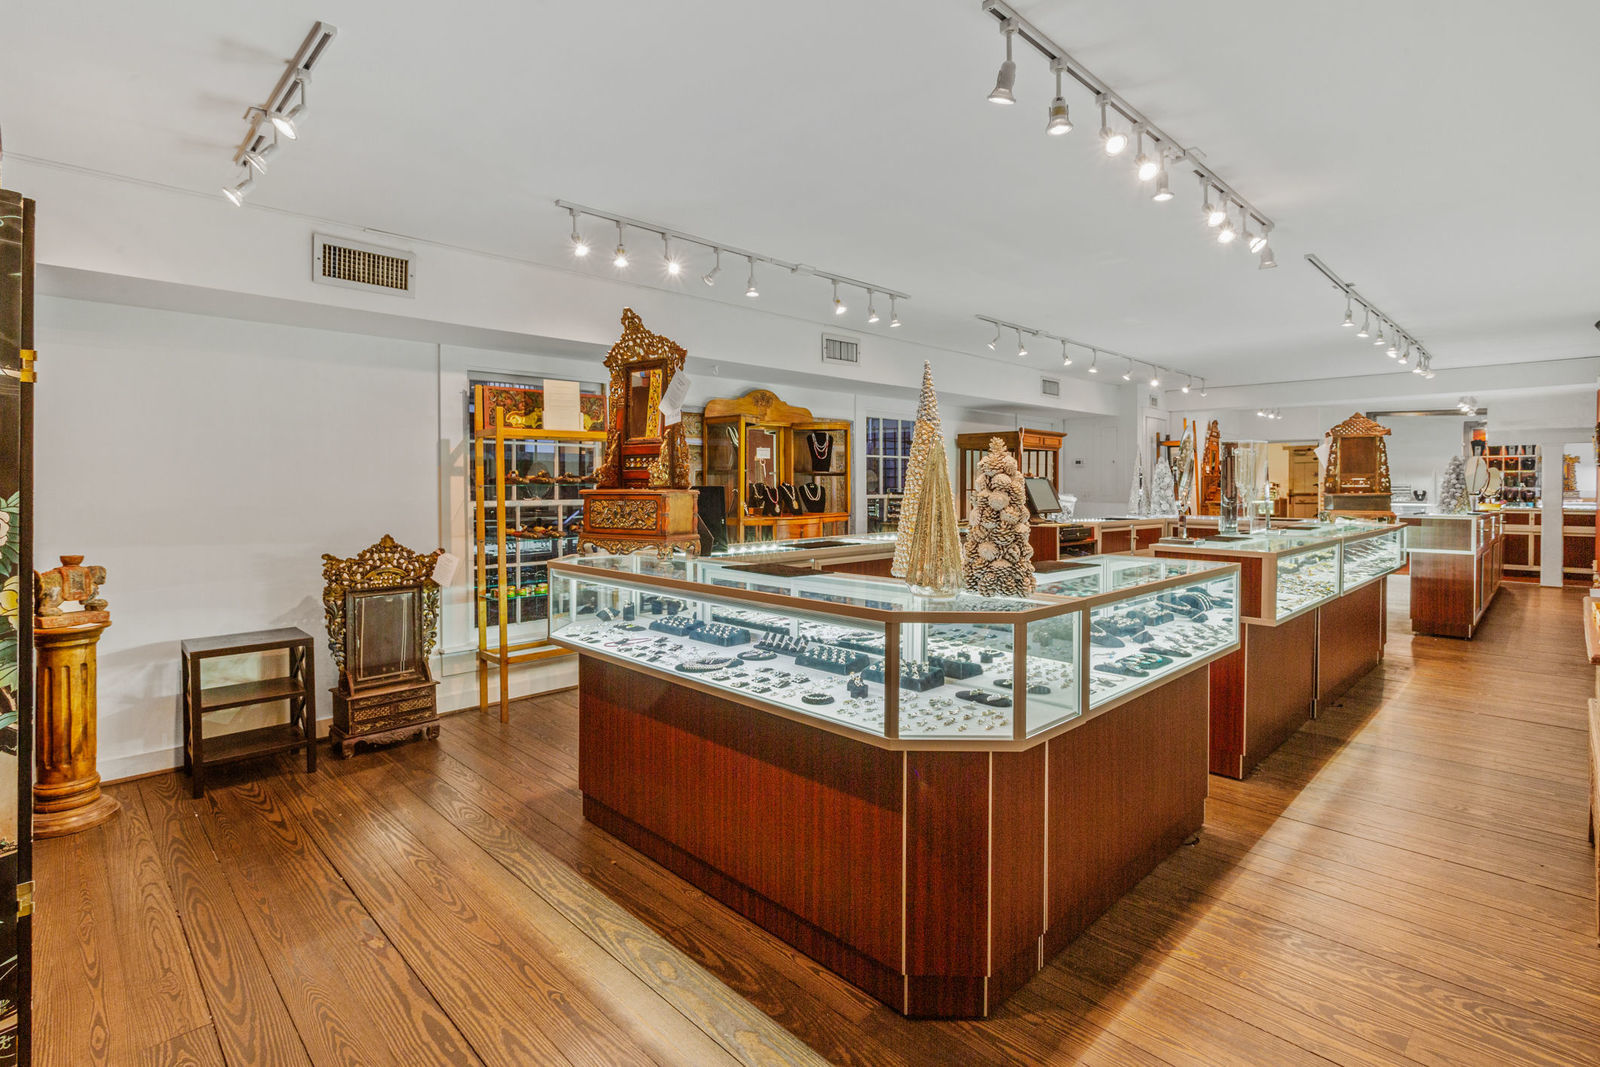 The 3,857-square-foot building houses the Casa Rodriguez jewelry store on the first floor.